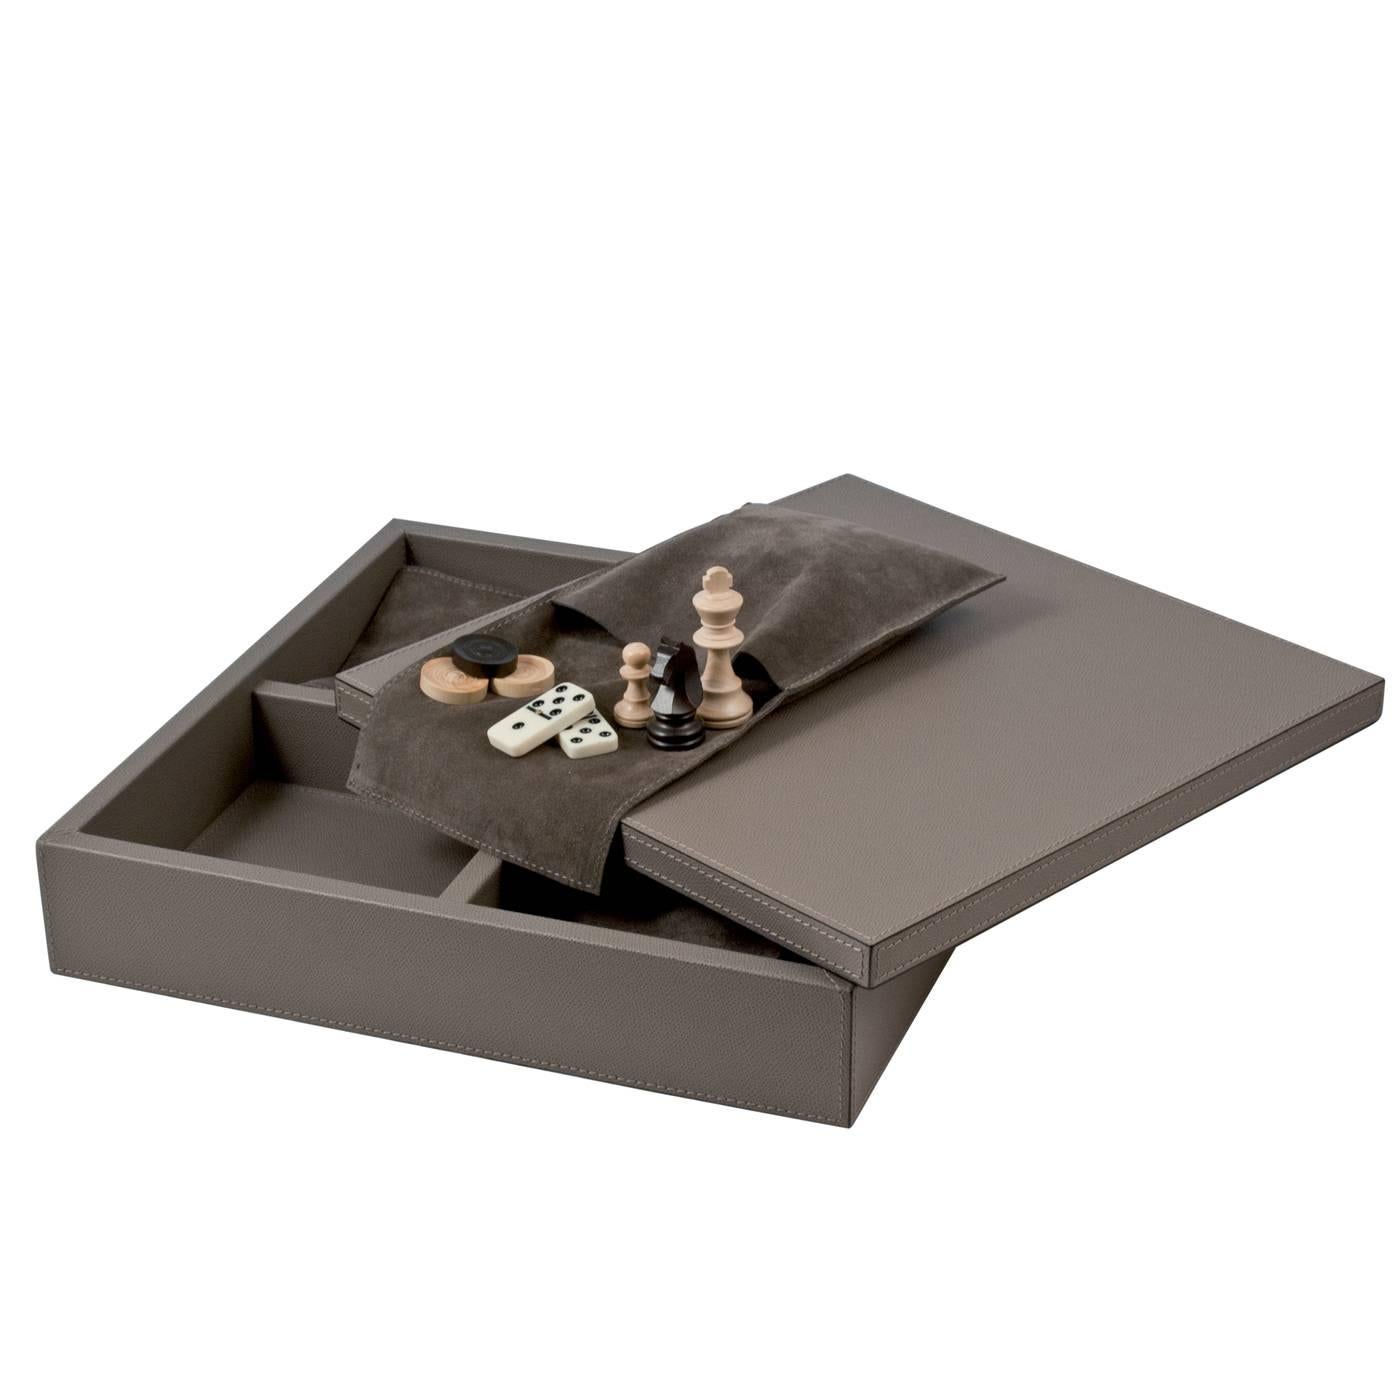 This charming case is a striking box that can be displayed anywhere in the house, while it hides inside three sets of games: chess, draughts, and domino. A wonderful addition to any living room, this box is made in wood with a leather cover that can